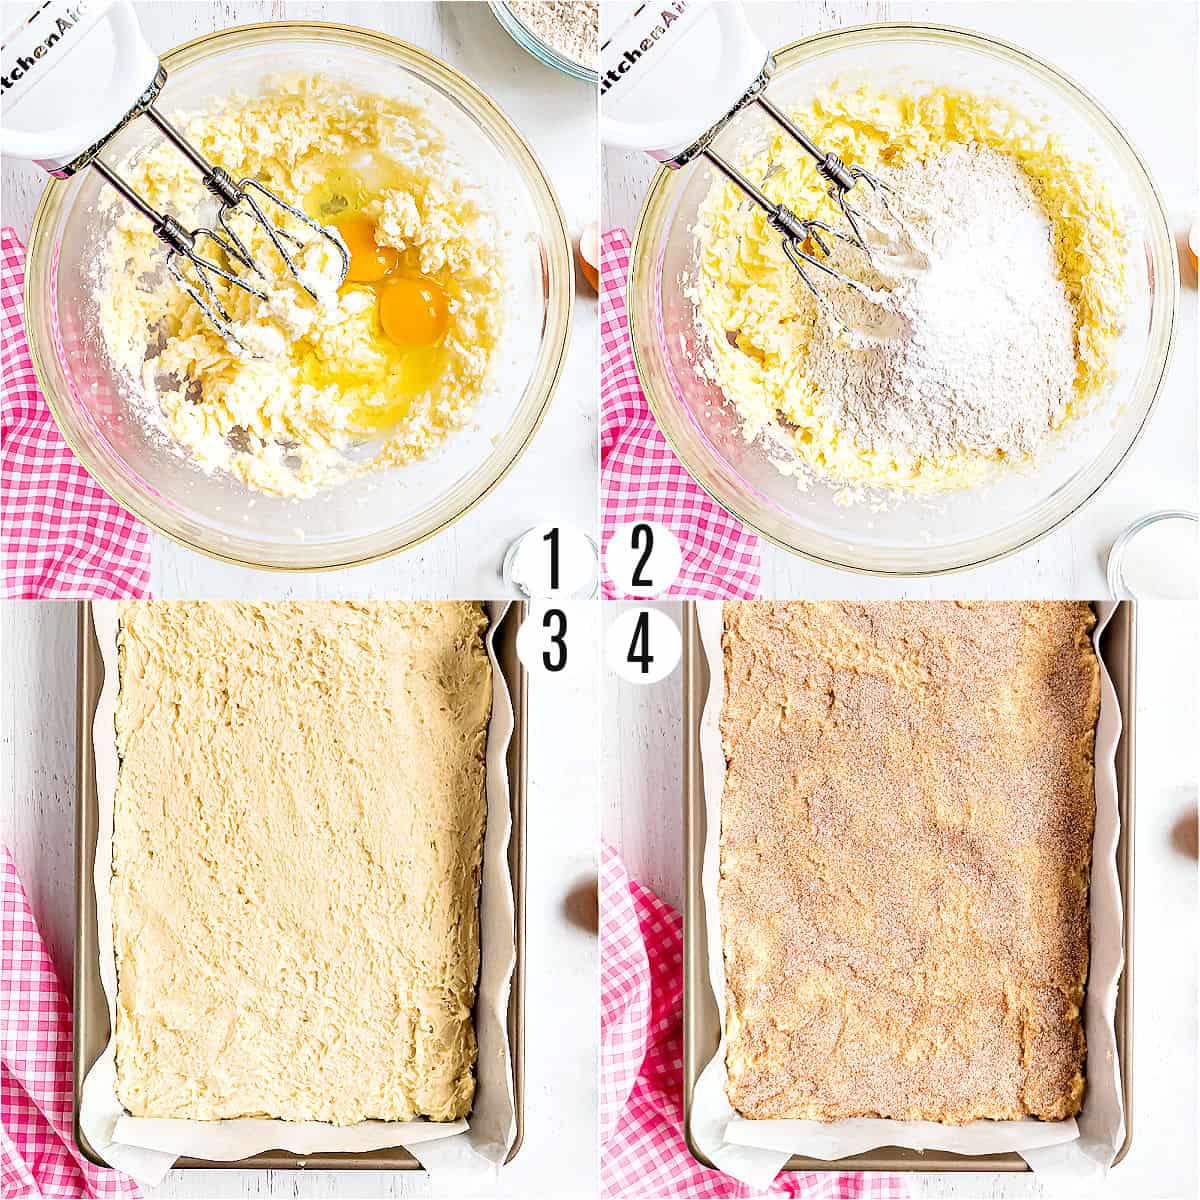 Step by step photos showing how to make snickerdoodle cookie bars.